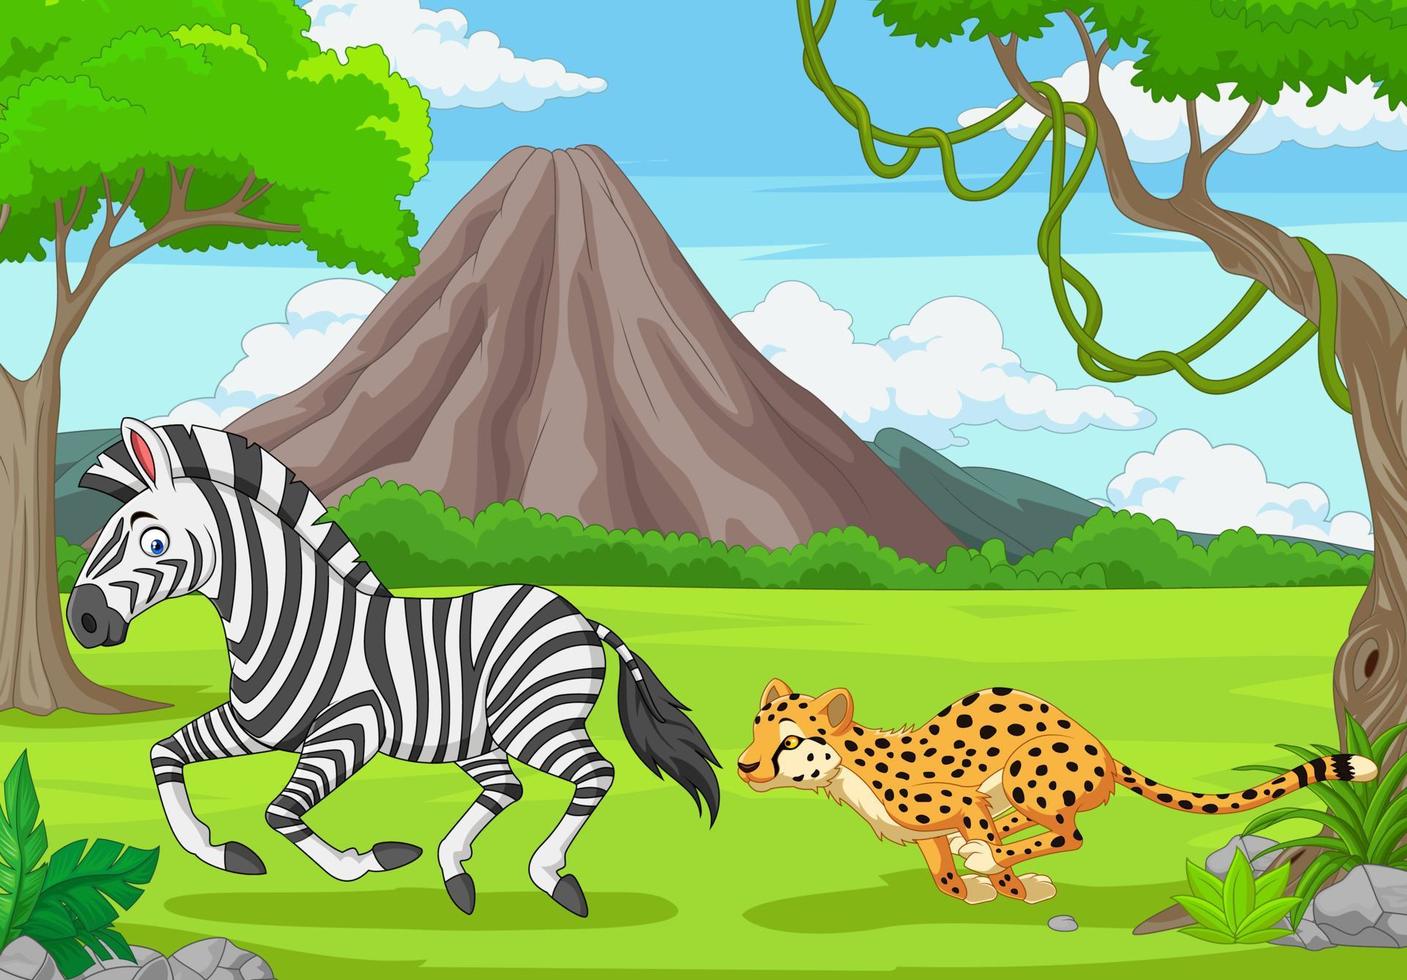 The cheetah is chasing a zebra in an African savanna vector